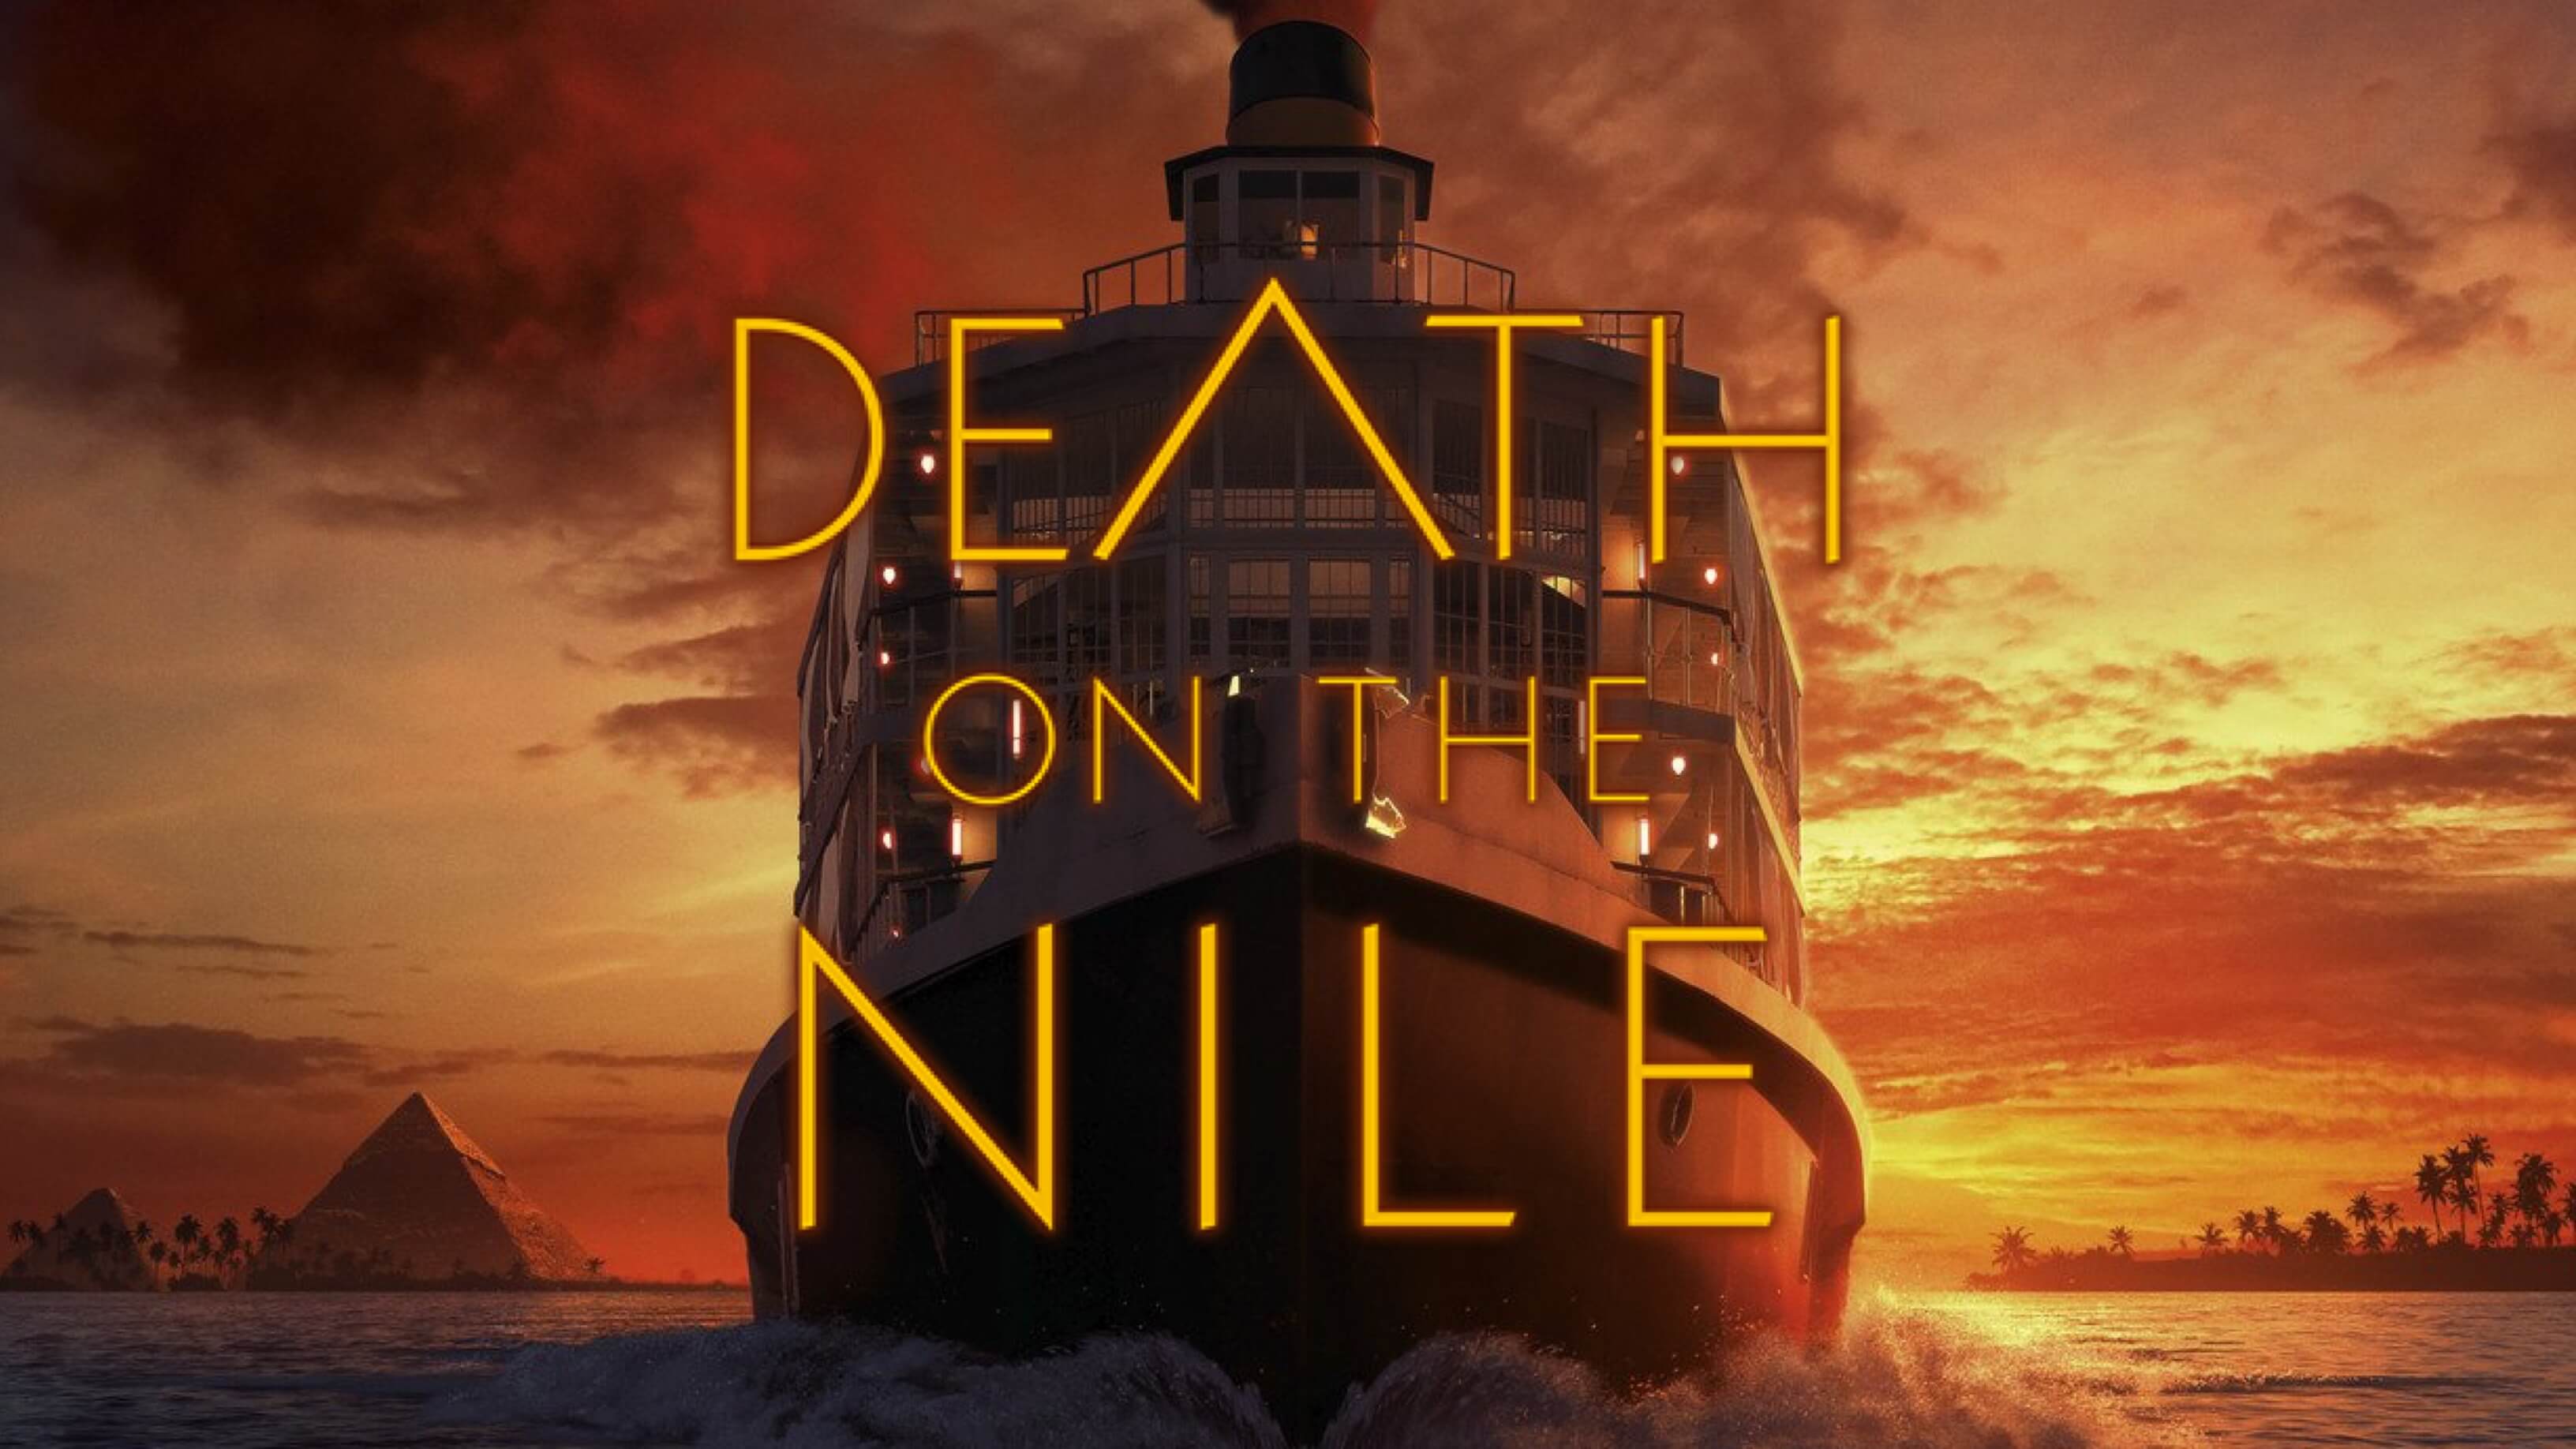 ‘Death on the Nile’ Is An Entertaining Film, But A Publicity Nightmare – Review